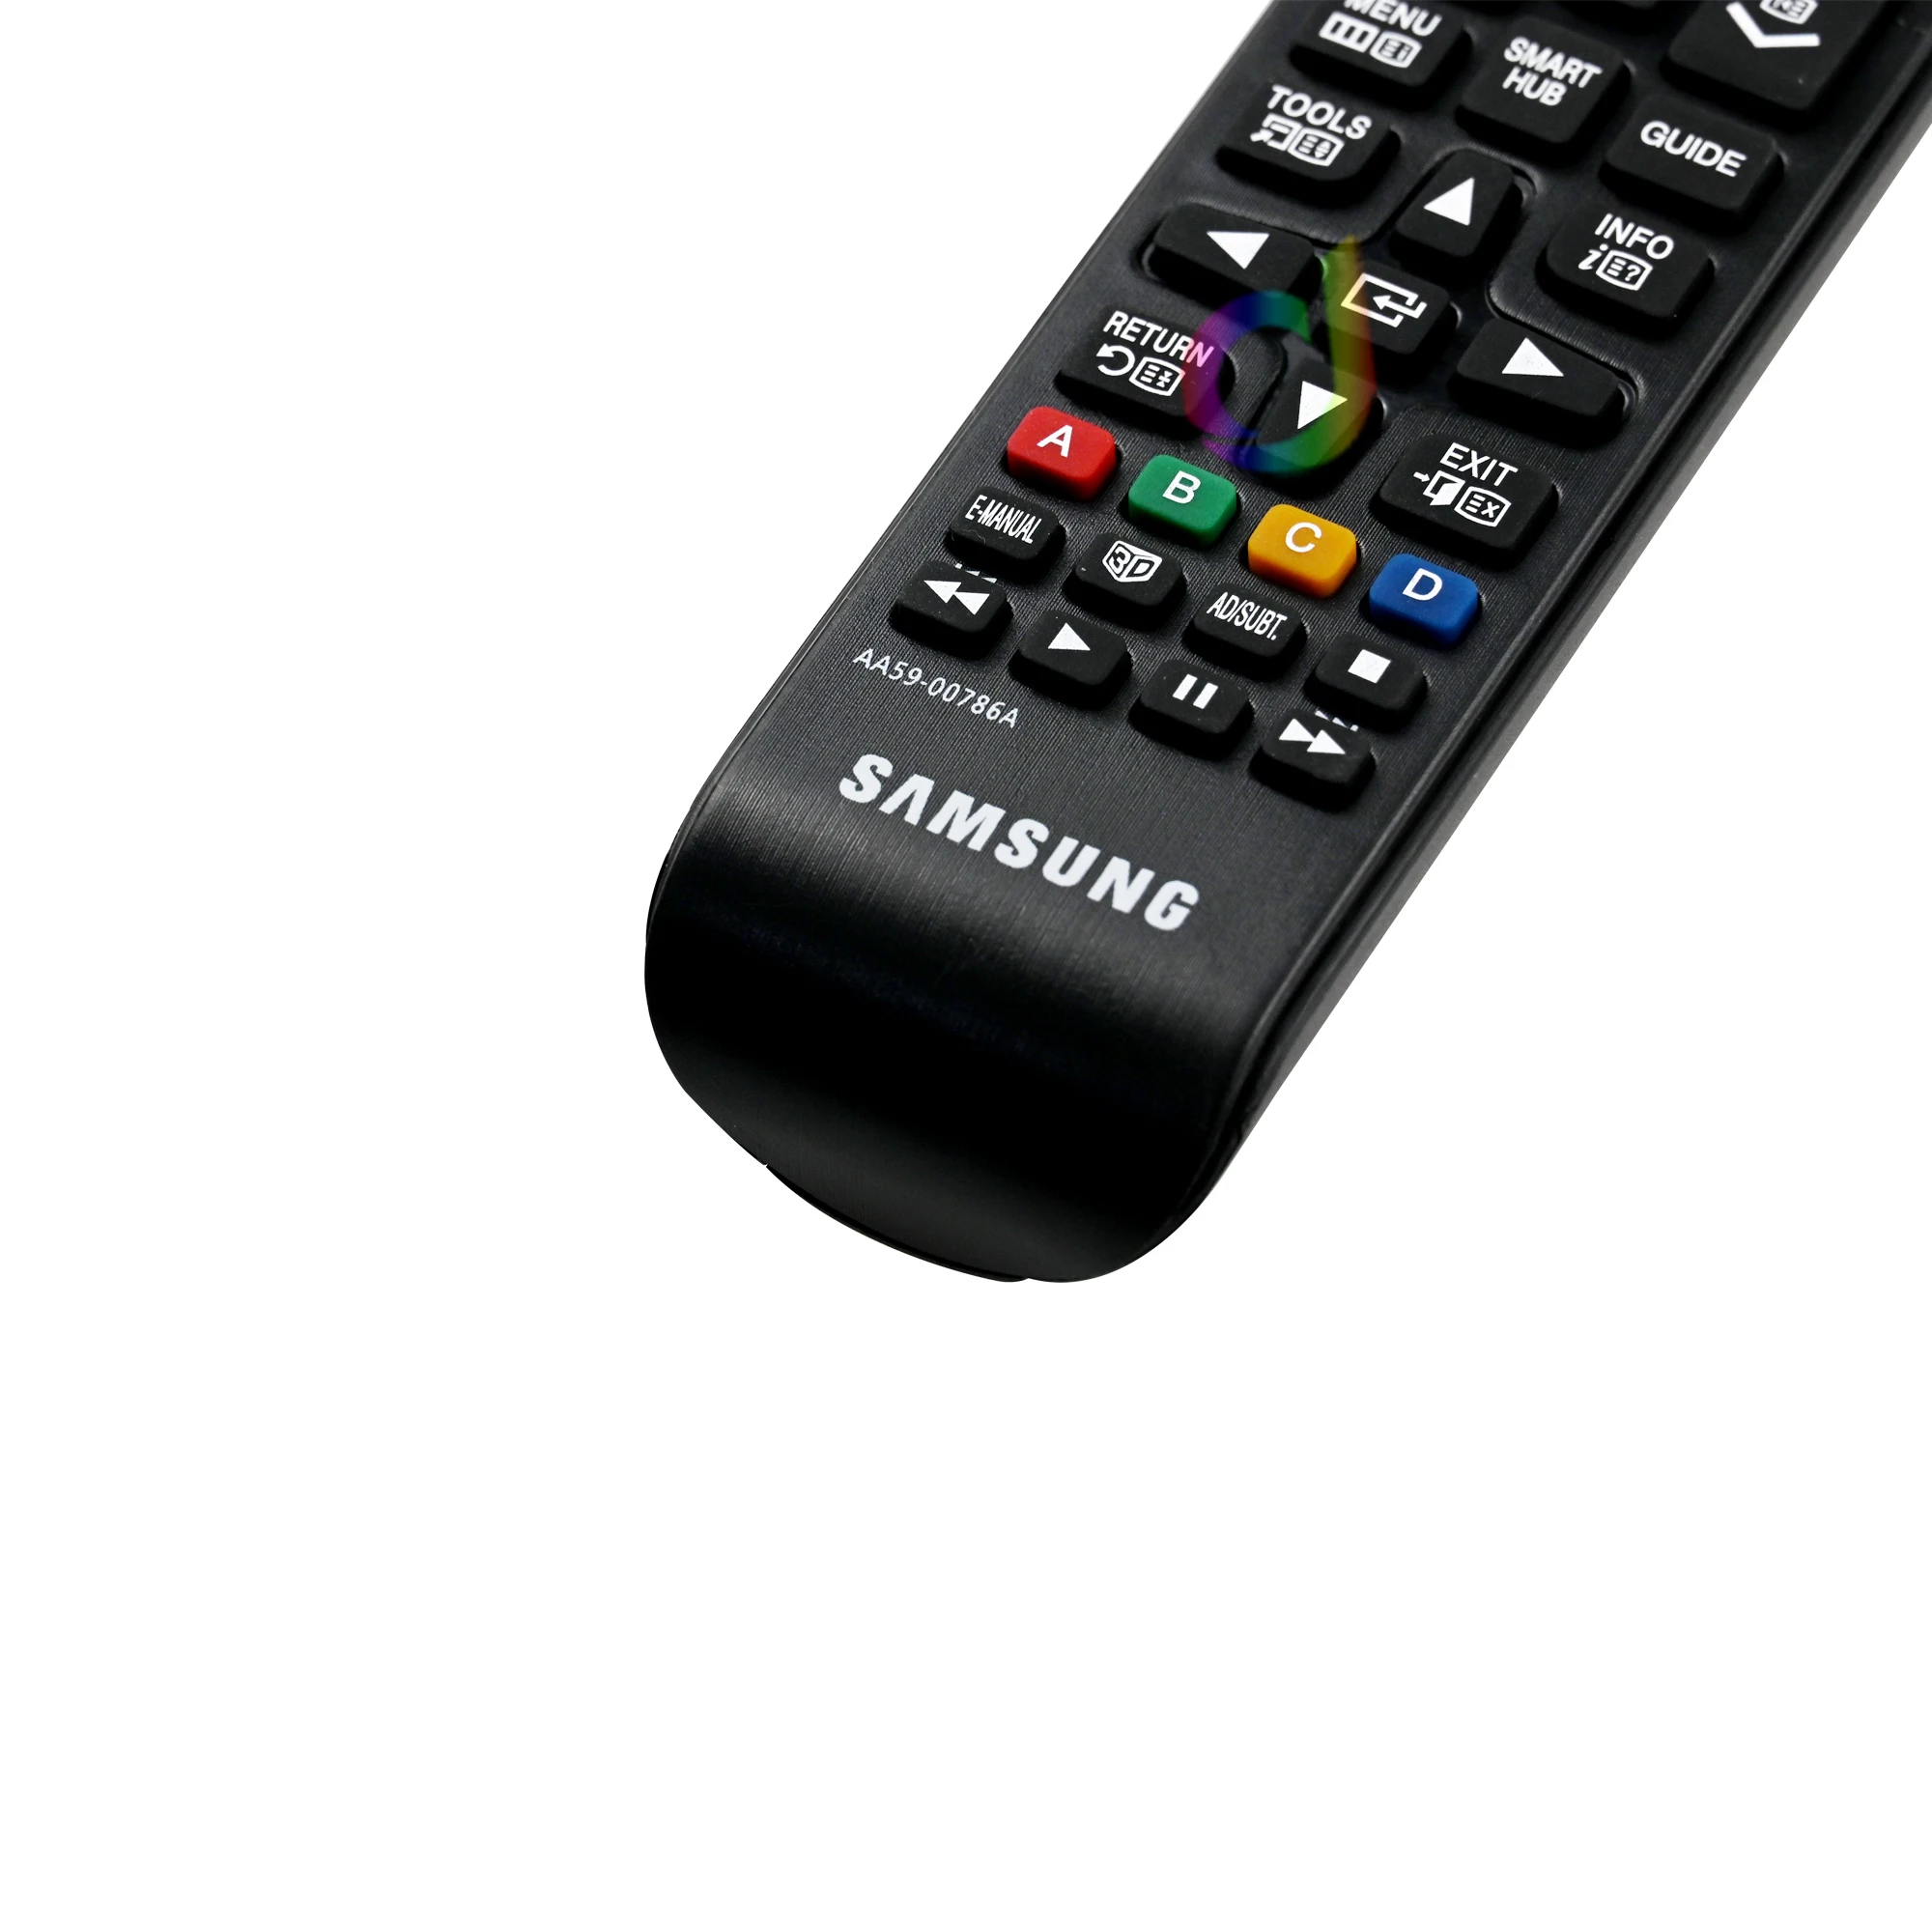 remote control aa59 00786a for samsung smart 3d qled crystal wifi led lcd ultra hd uhd hdr tv 4k 8k 22 88 inch series aa59 bn59 free global shipping